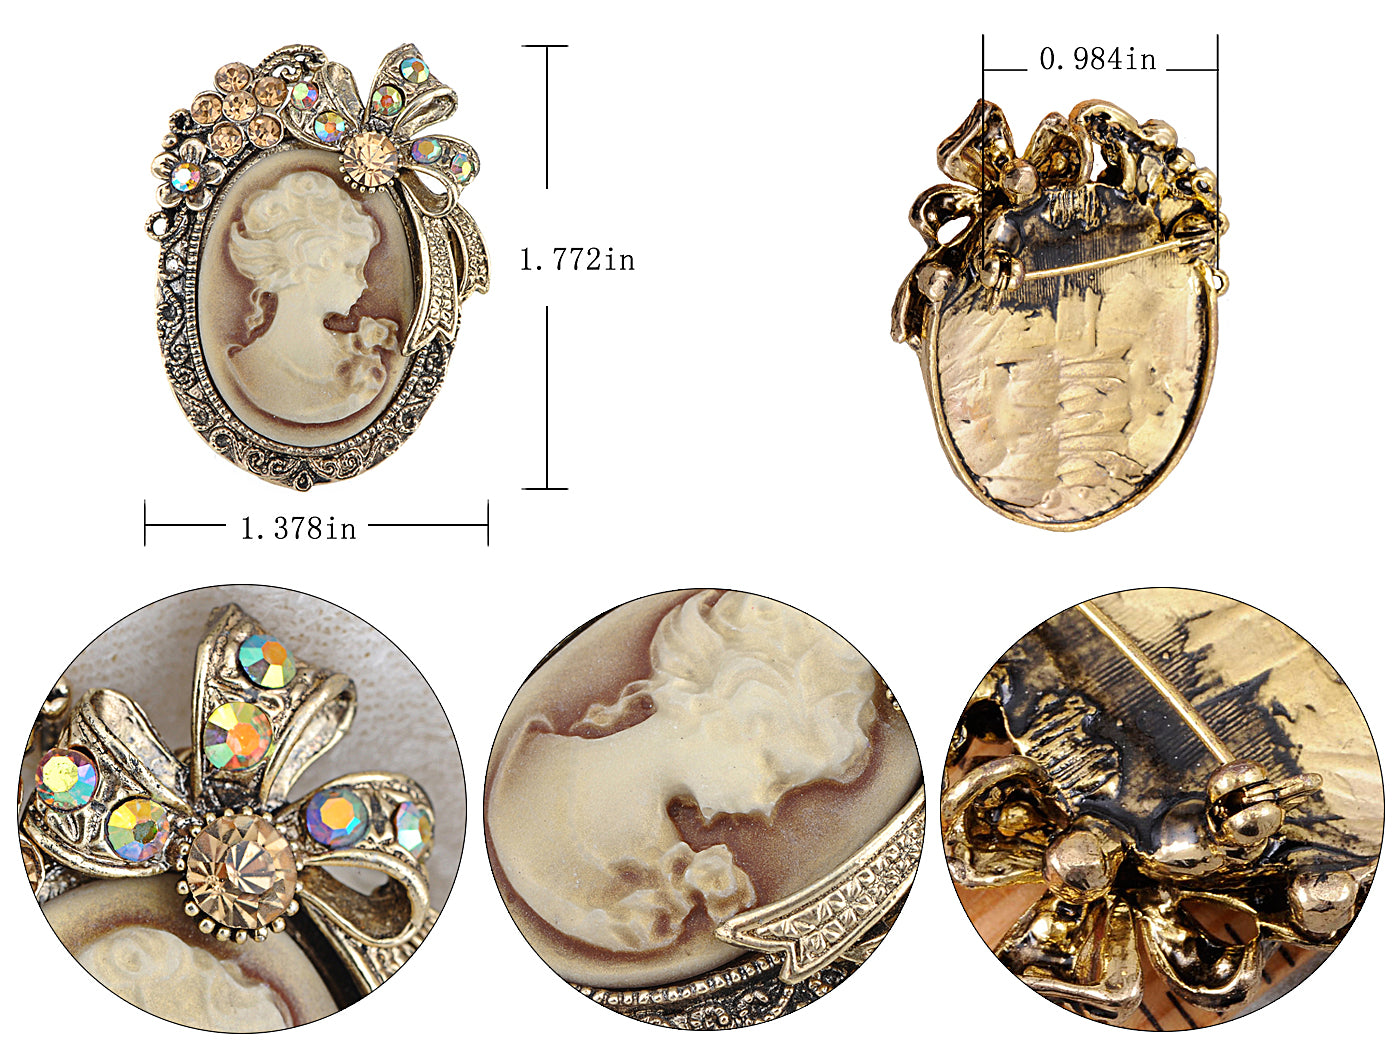 Vintage Victorian Lady Cameo Brooch Pin Maiden Flower Ribbon Bow Pendant